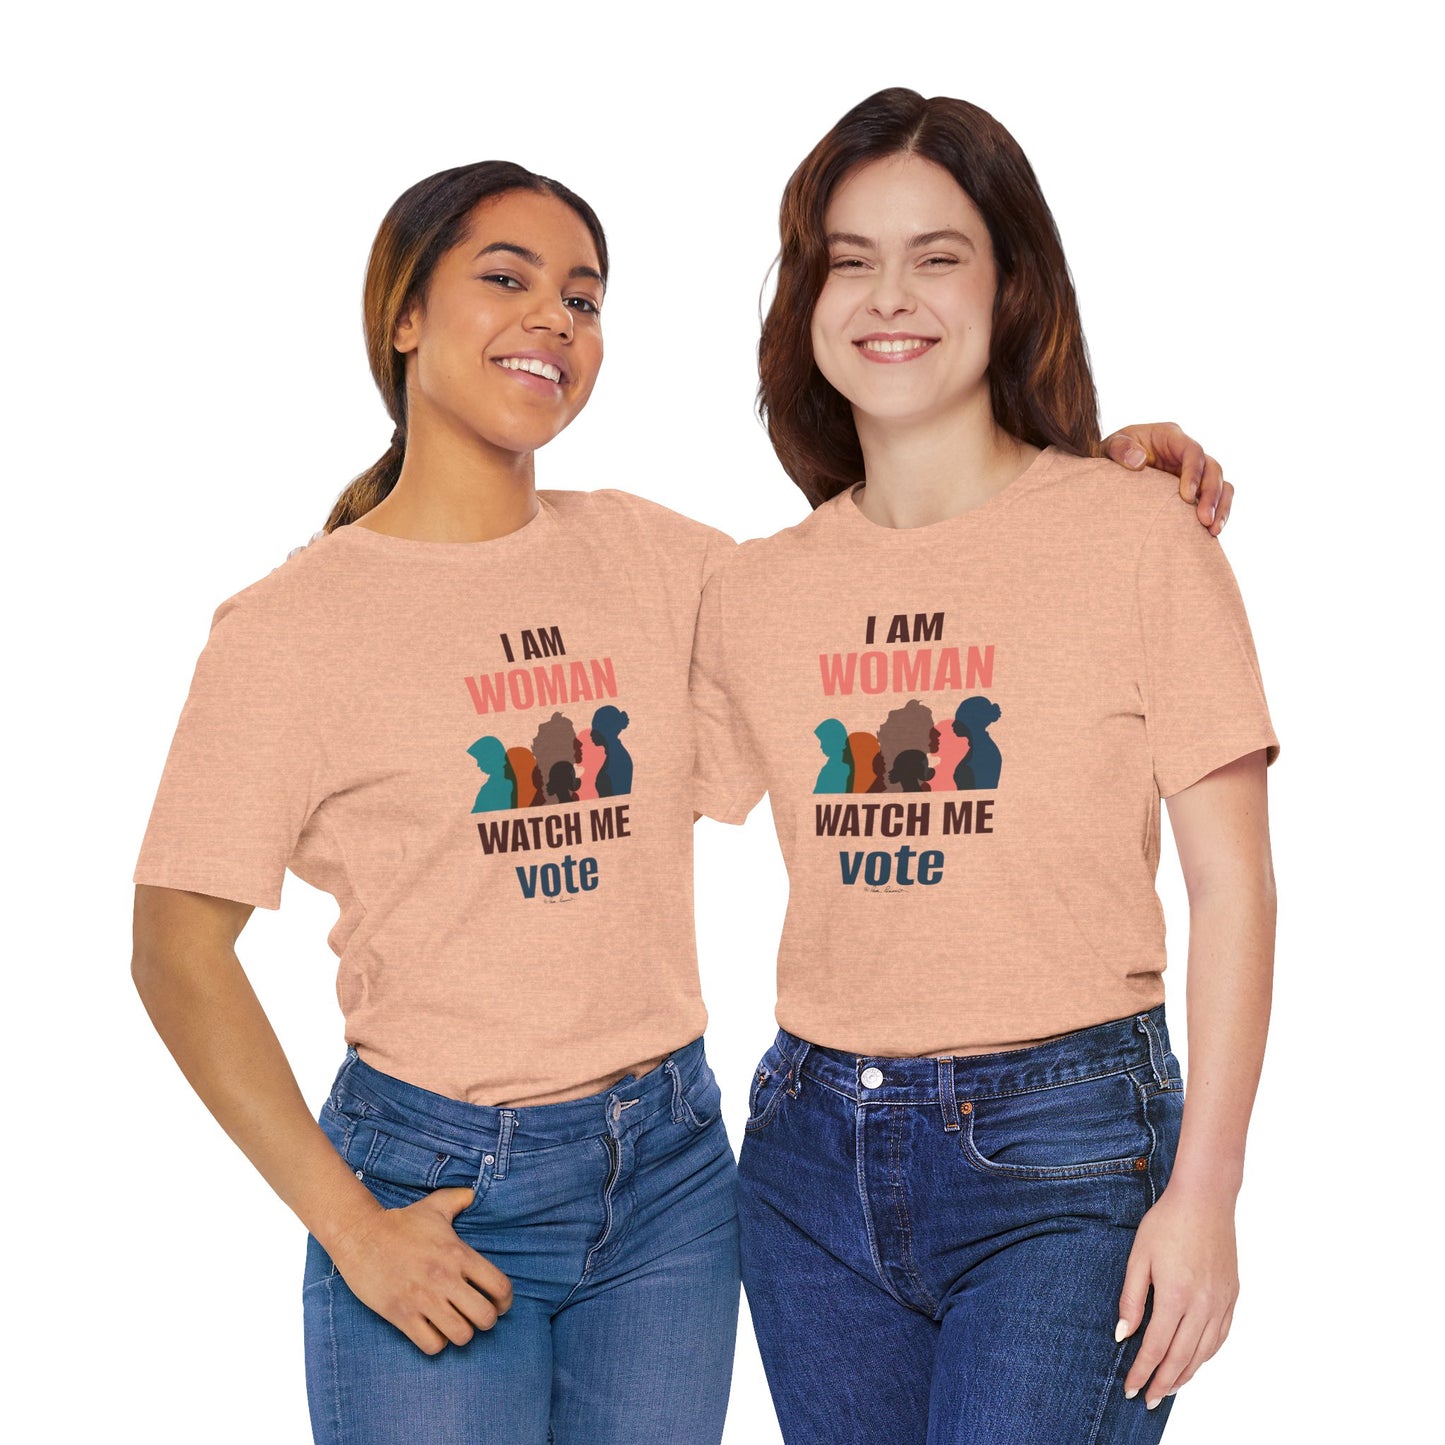 Two women smiling and wearing matching Printify Bella+Canvas Voting Women's T-shirts with the text "i am woman watch me vote" on a plain background.